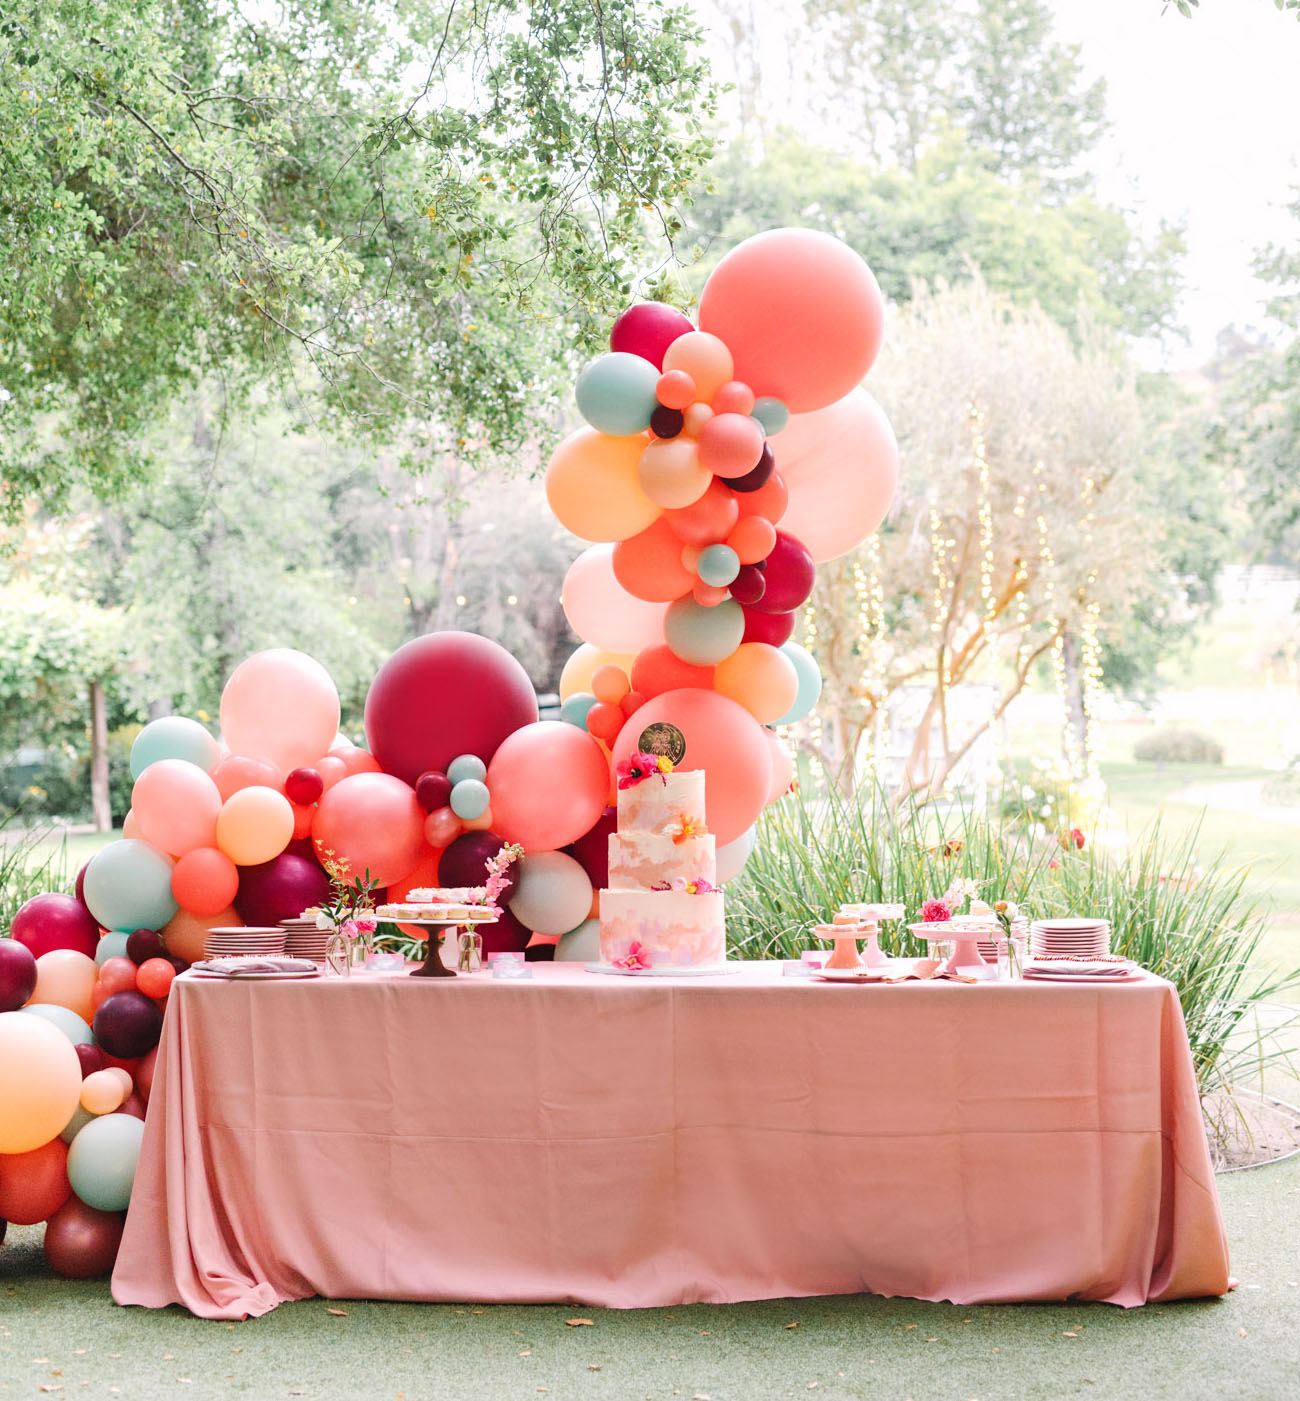 The dessert table was accented with a gorgeous colorful balloon arch behind it